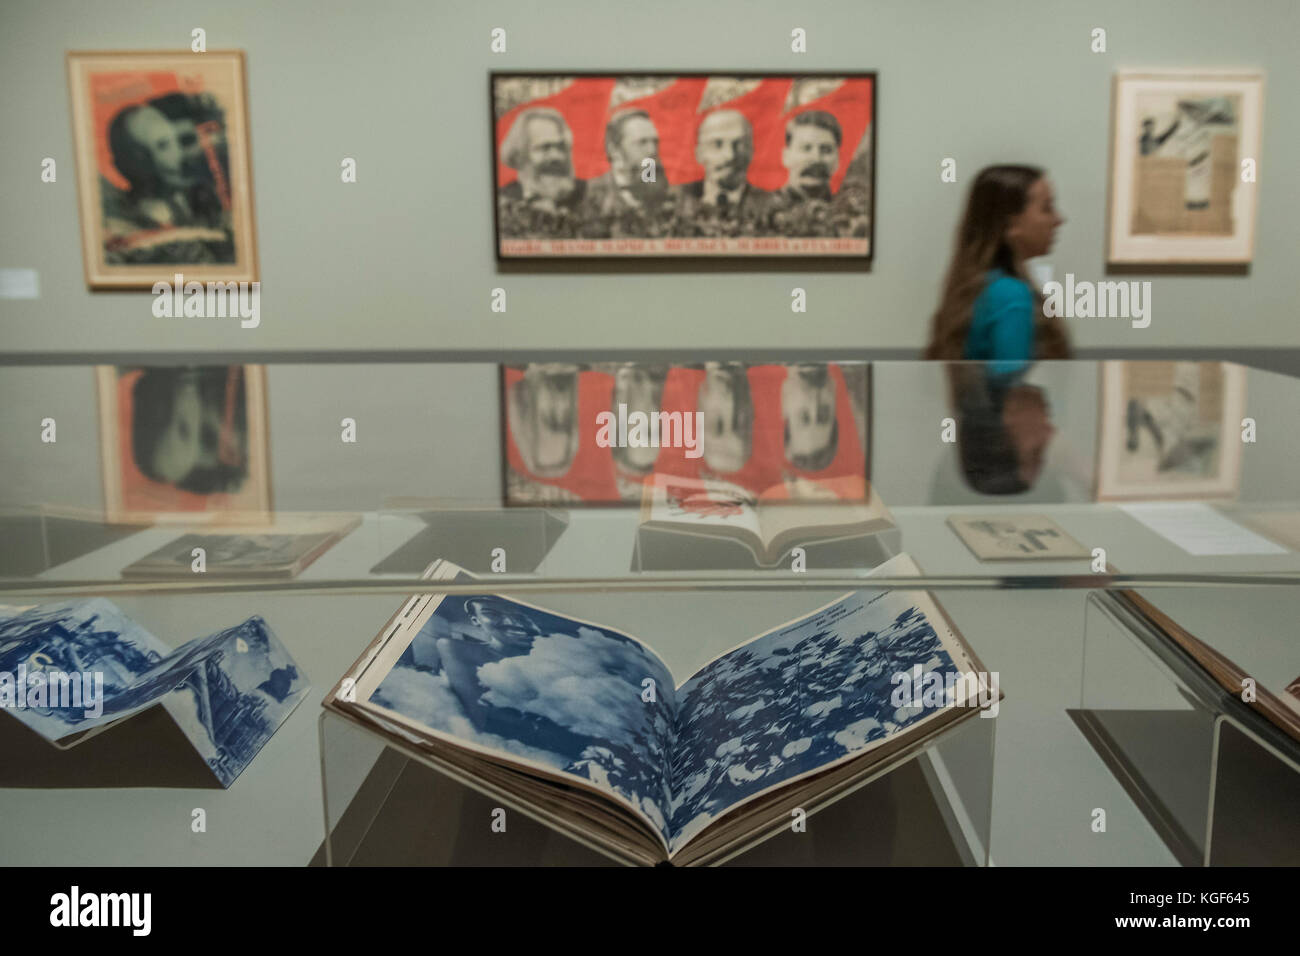 London, UK. 7th Nov, 2017. Books by Rodchenko and Raise high the banner of Marx Engel, Lenin and Stalin, 1933 by Gustave Klutsis. Tate Modern's new exhibition Red Star Over Russia on the 100th anniversary of the October Revolution. The exhibition offers a visual history of the Soviet Union, revealing how seismic political events inspired a wave of innovation in art and graphic design. Featuring over 250 posters, paintings and photographs, many on public display for the first time. Credit: Guy Bell/Alamy Live News Stock Photo